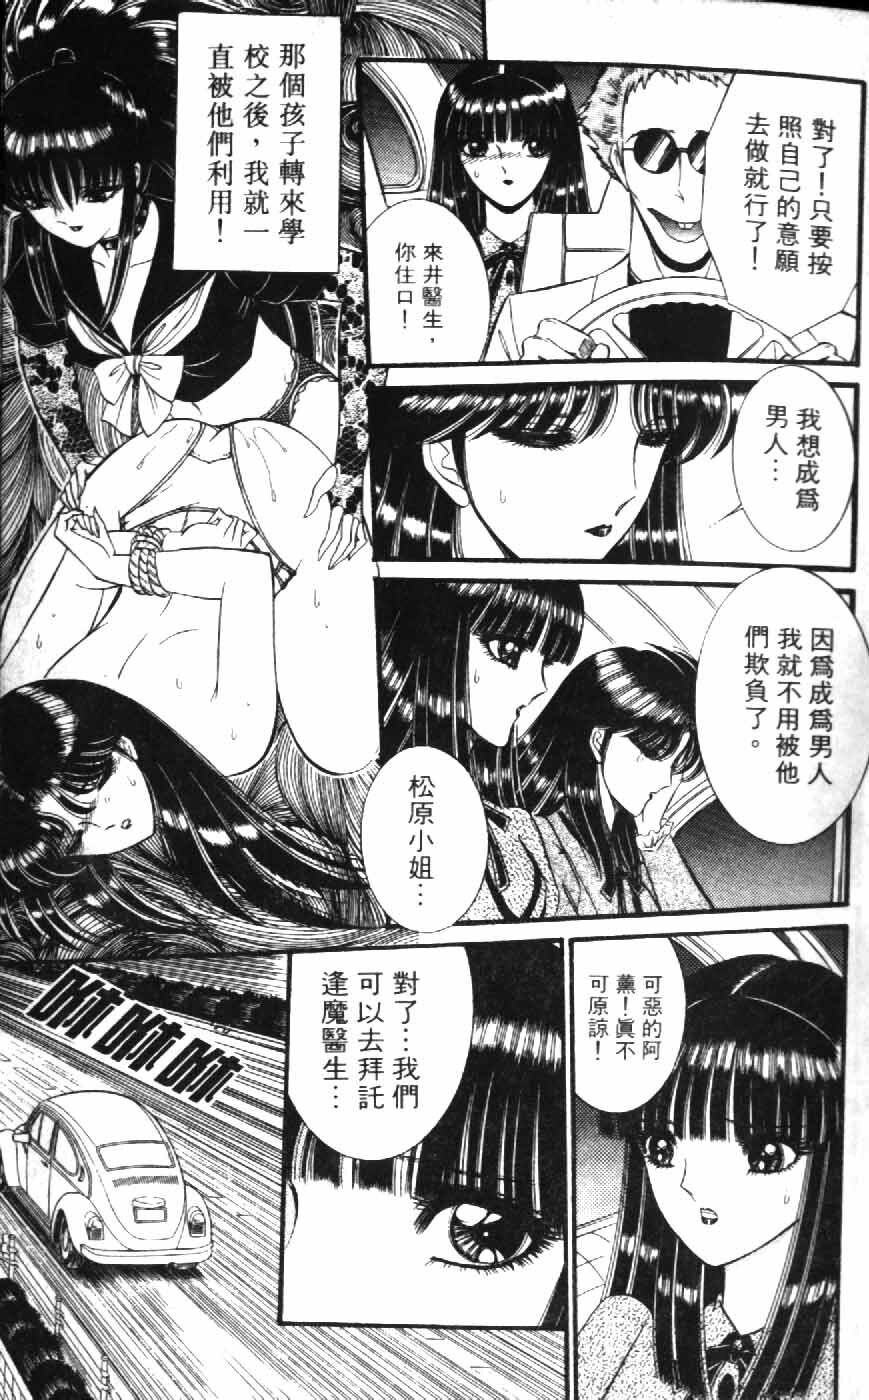 [Senno Knife] Ouma ga Horror Show 1 - Trans Sexual Special Show 1 | 顫慄博覽會 1 [Chinese] page 41 full